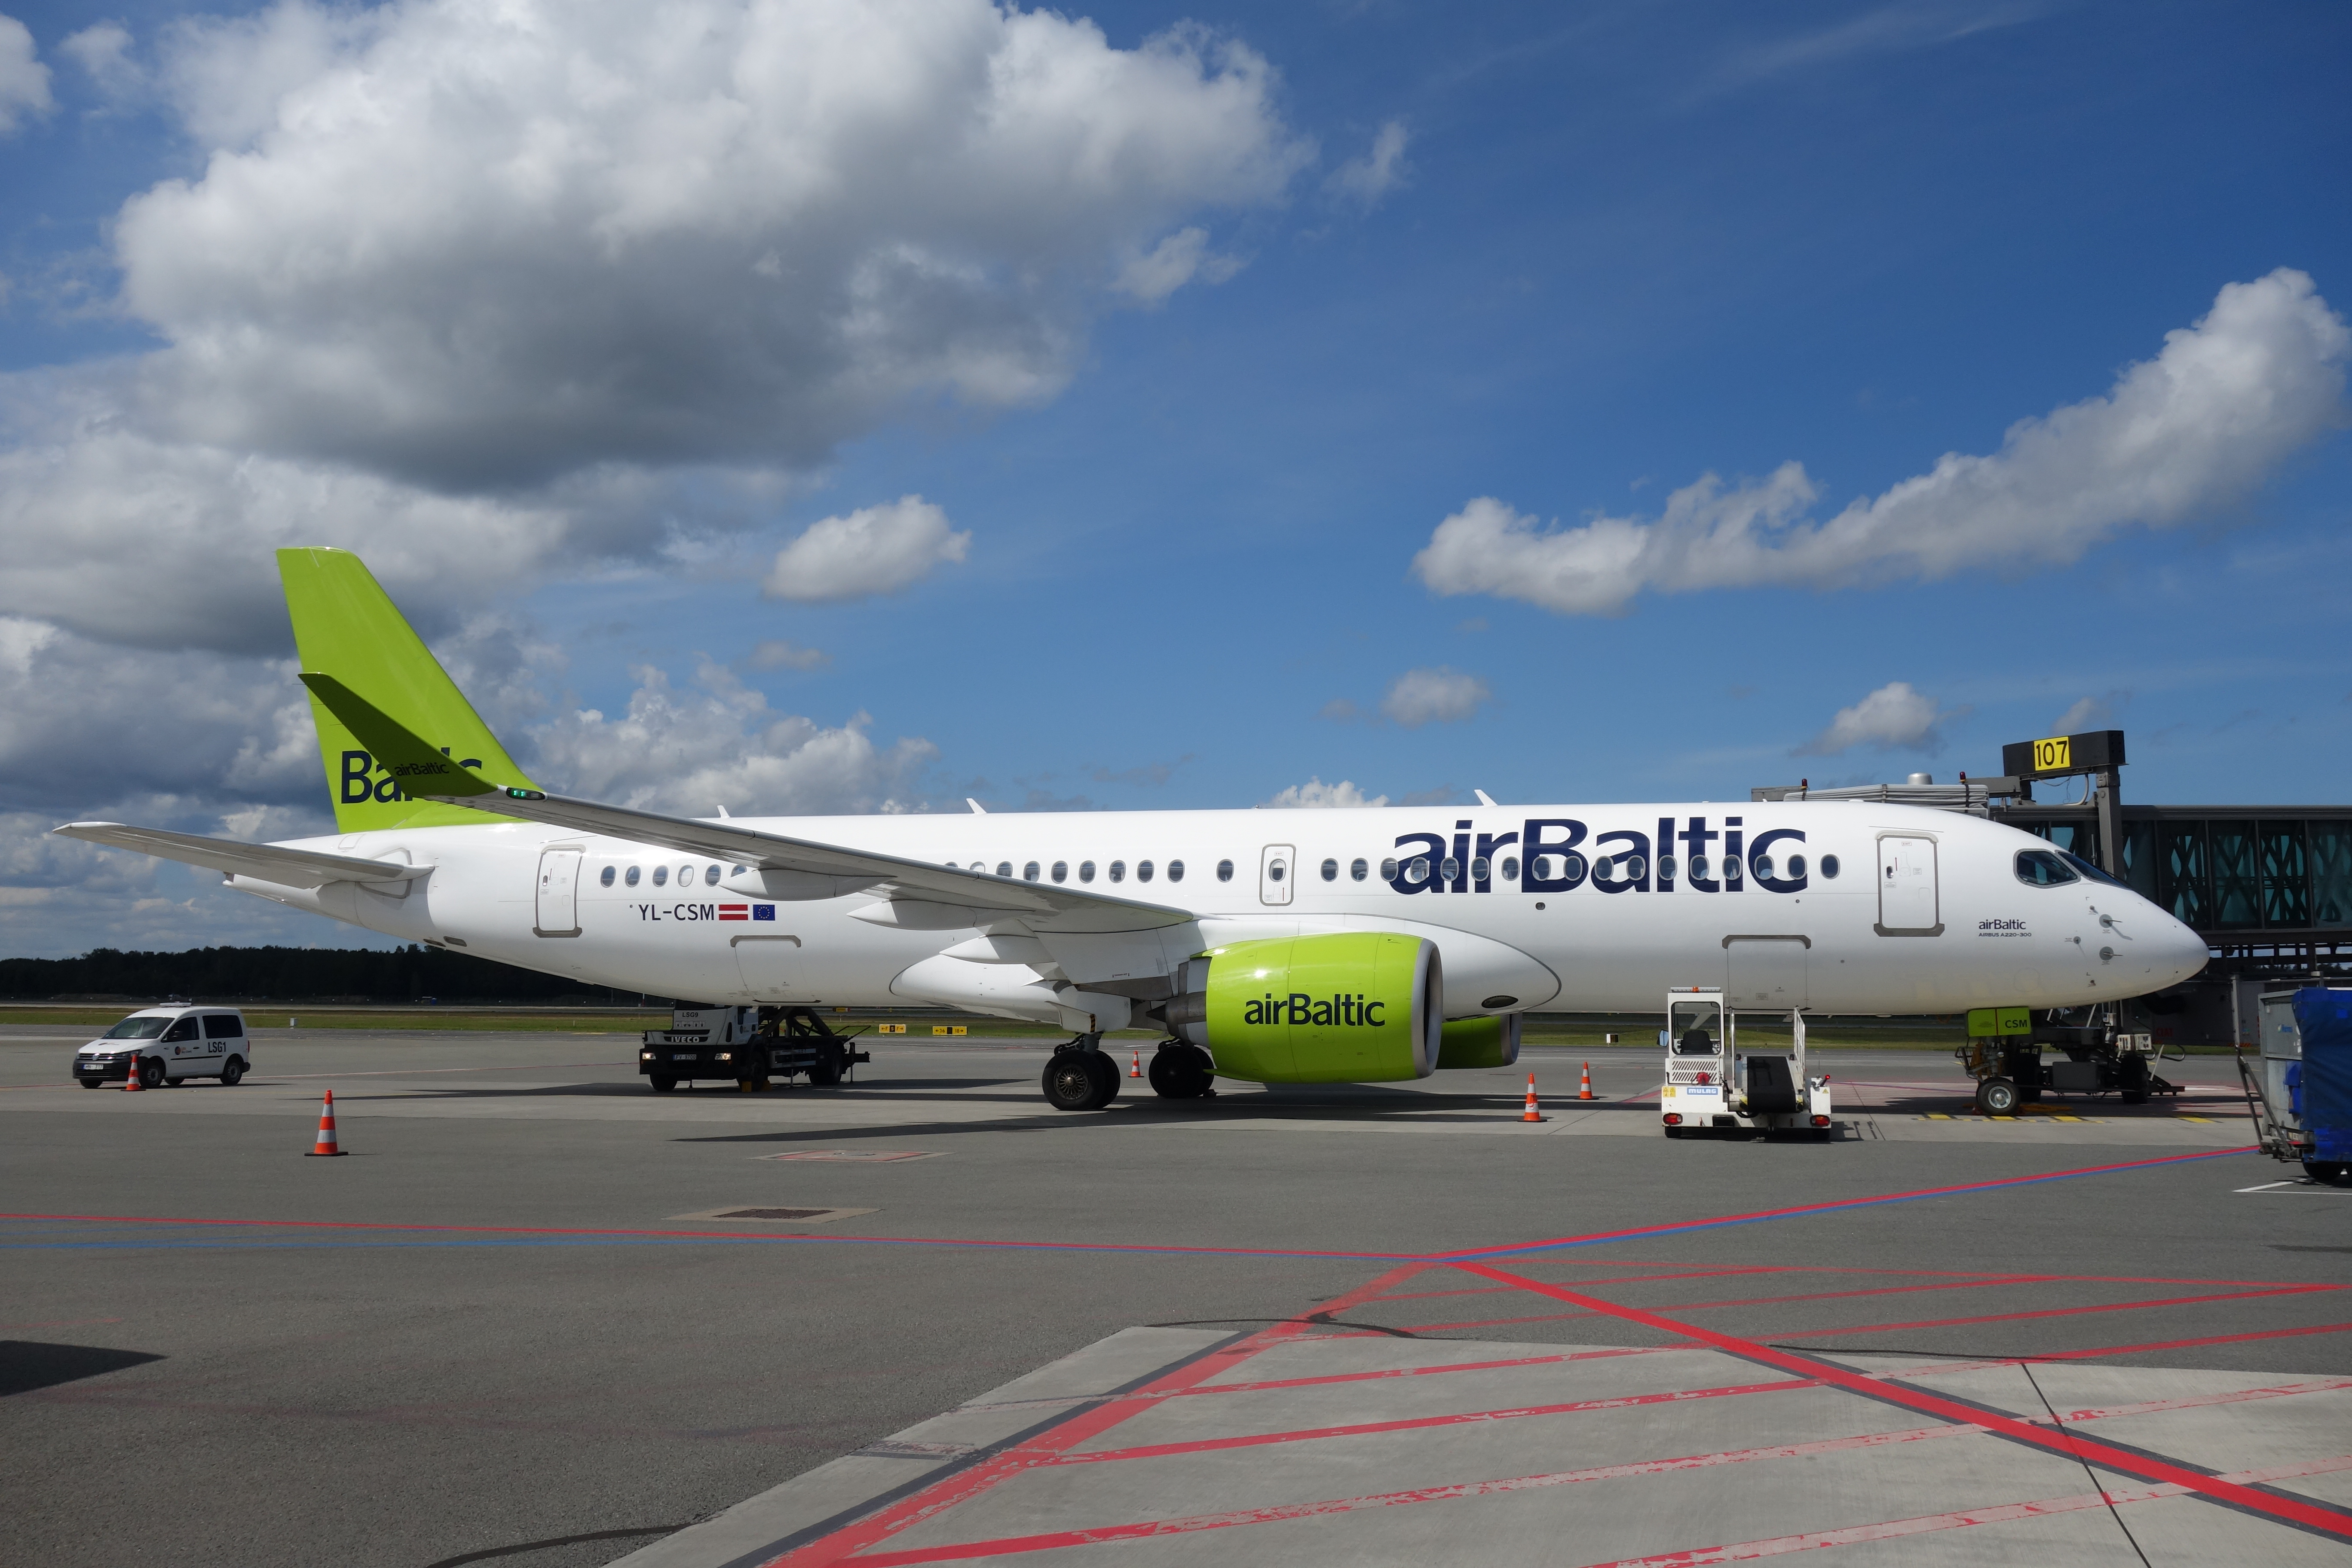 A brightly painted airBaltic Airbus A220 prepares for departure at a gate in Riga, Latvia.  The engine and tail is a chartreuse green while the fuselage is white and the airline name printed in navy blue. 